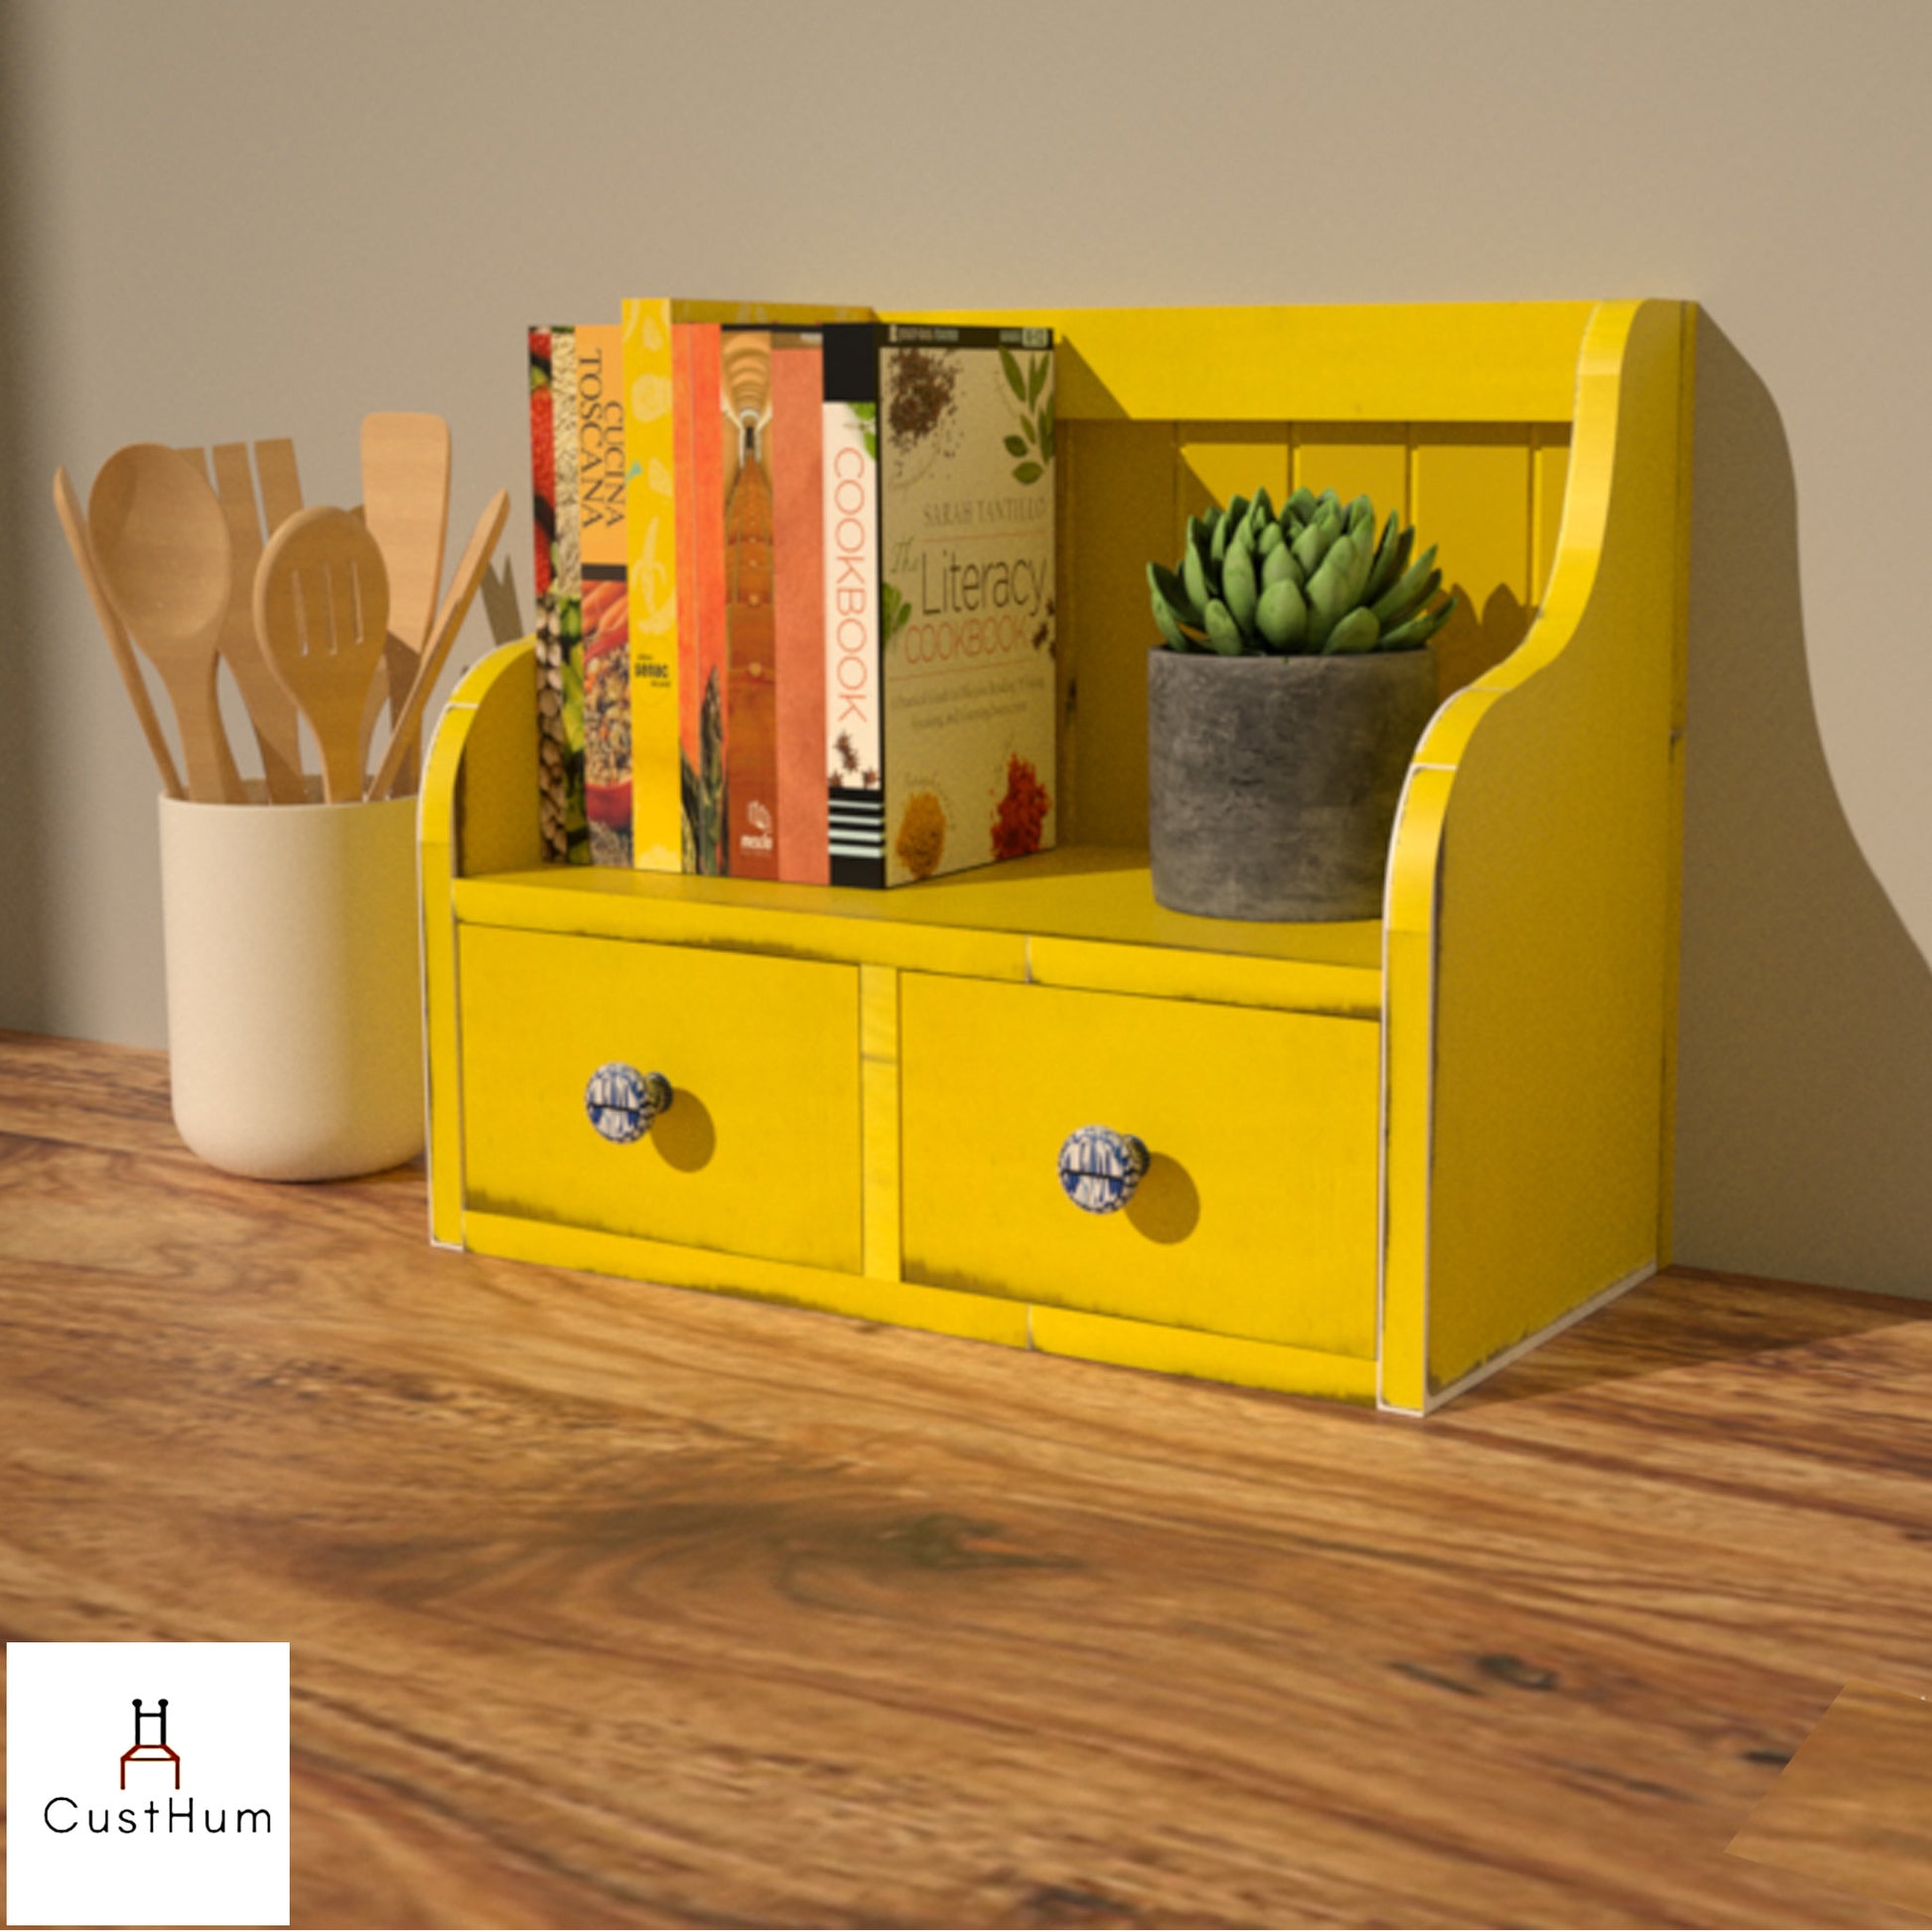 CustHum-Downton-multipurpose kitchn countertop organizer-distressed yellow with props